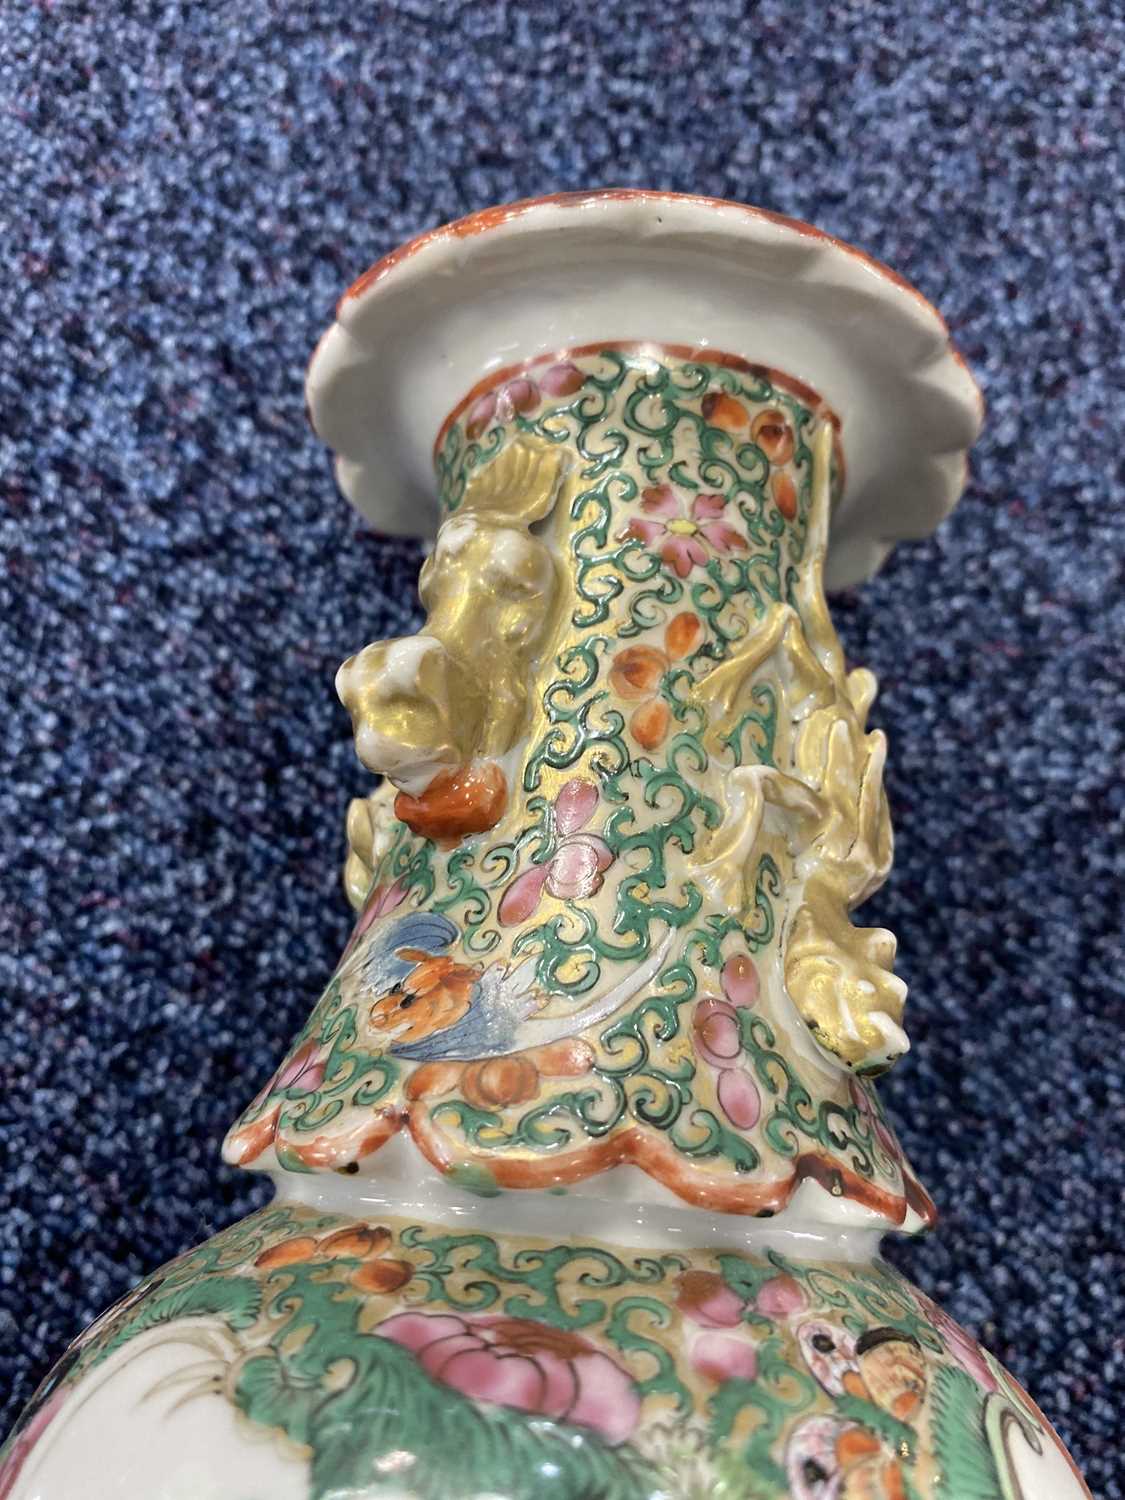 PAIR OF CHINESE FAMILLE ROSE VASES, MID 19TH CENTURY - Image 10 of 11